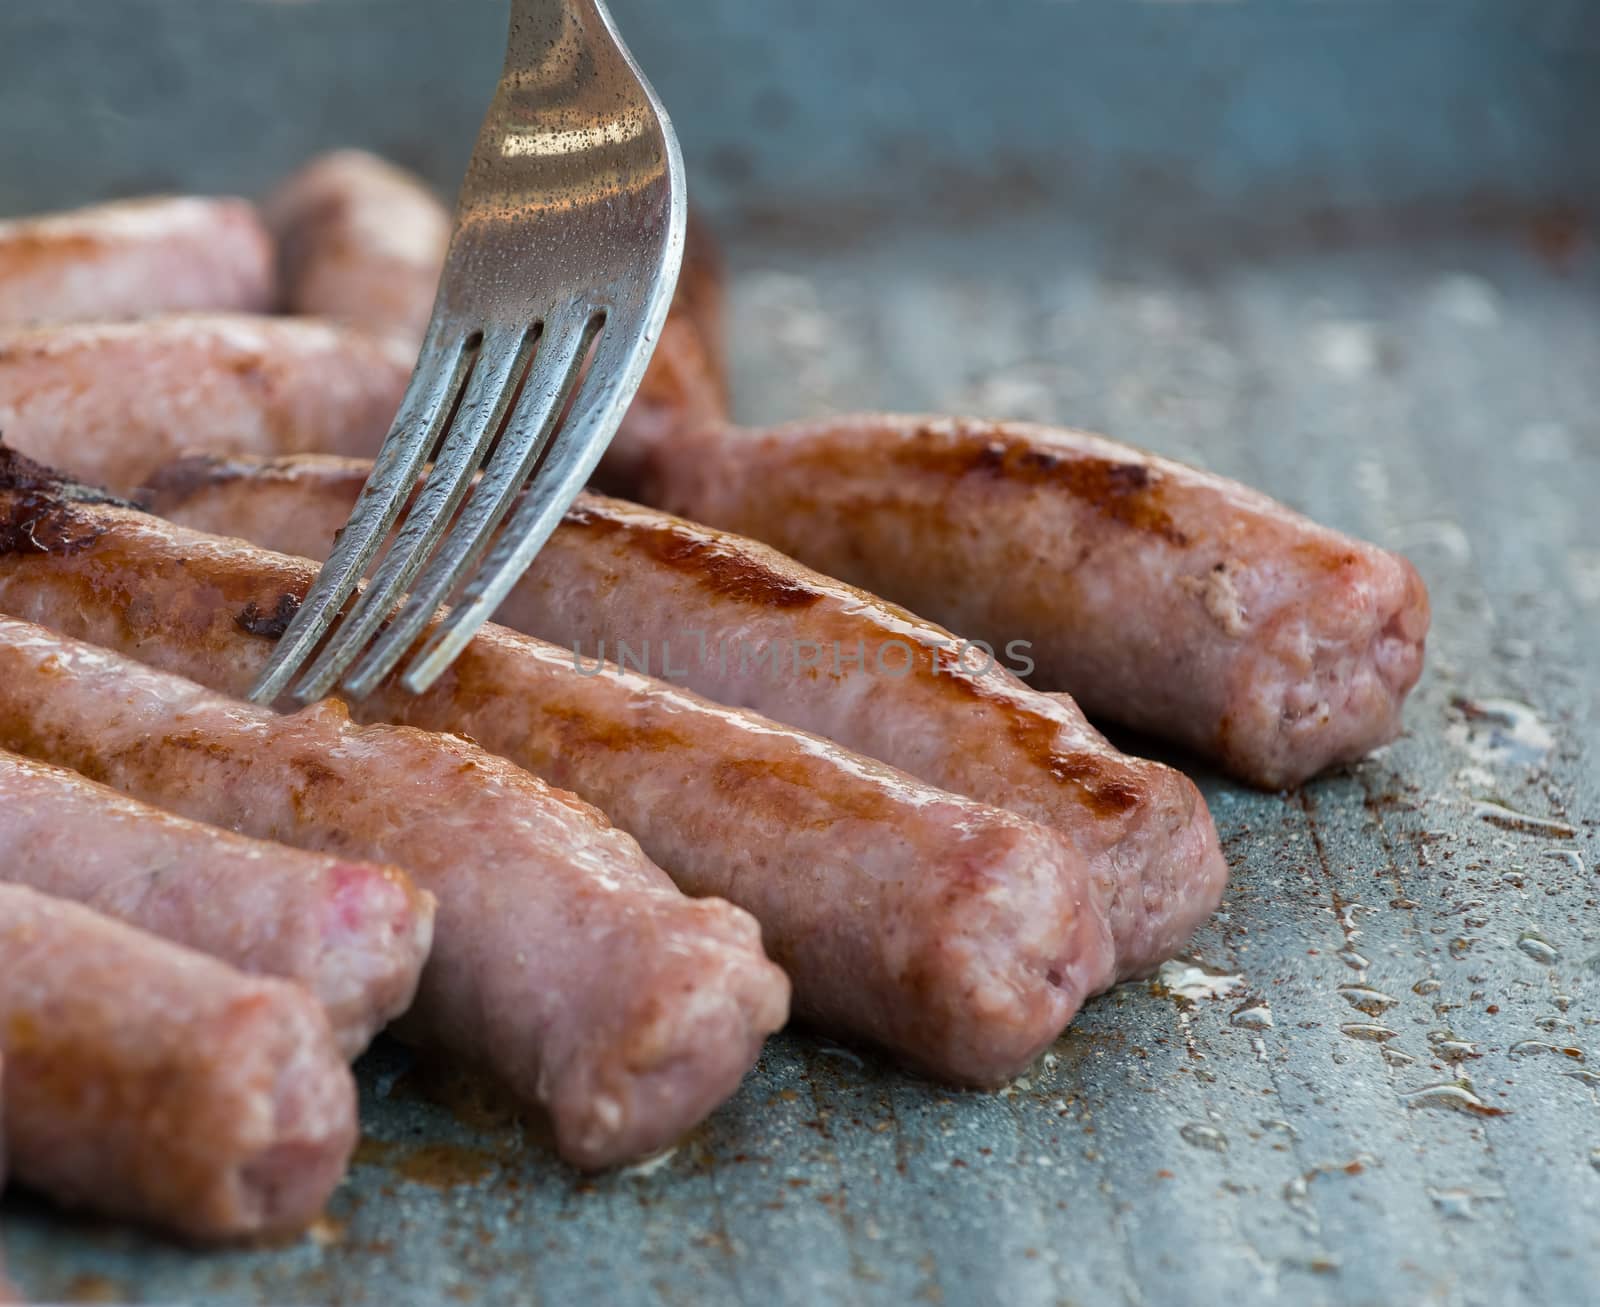 In the picture of the pork sausages they are cooked on the grill with a fork while cooking is controlled.